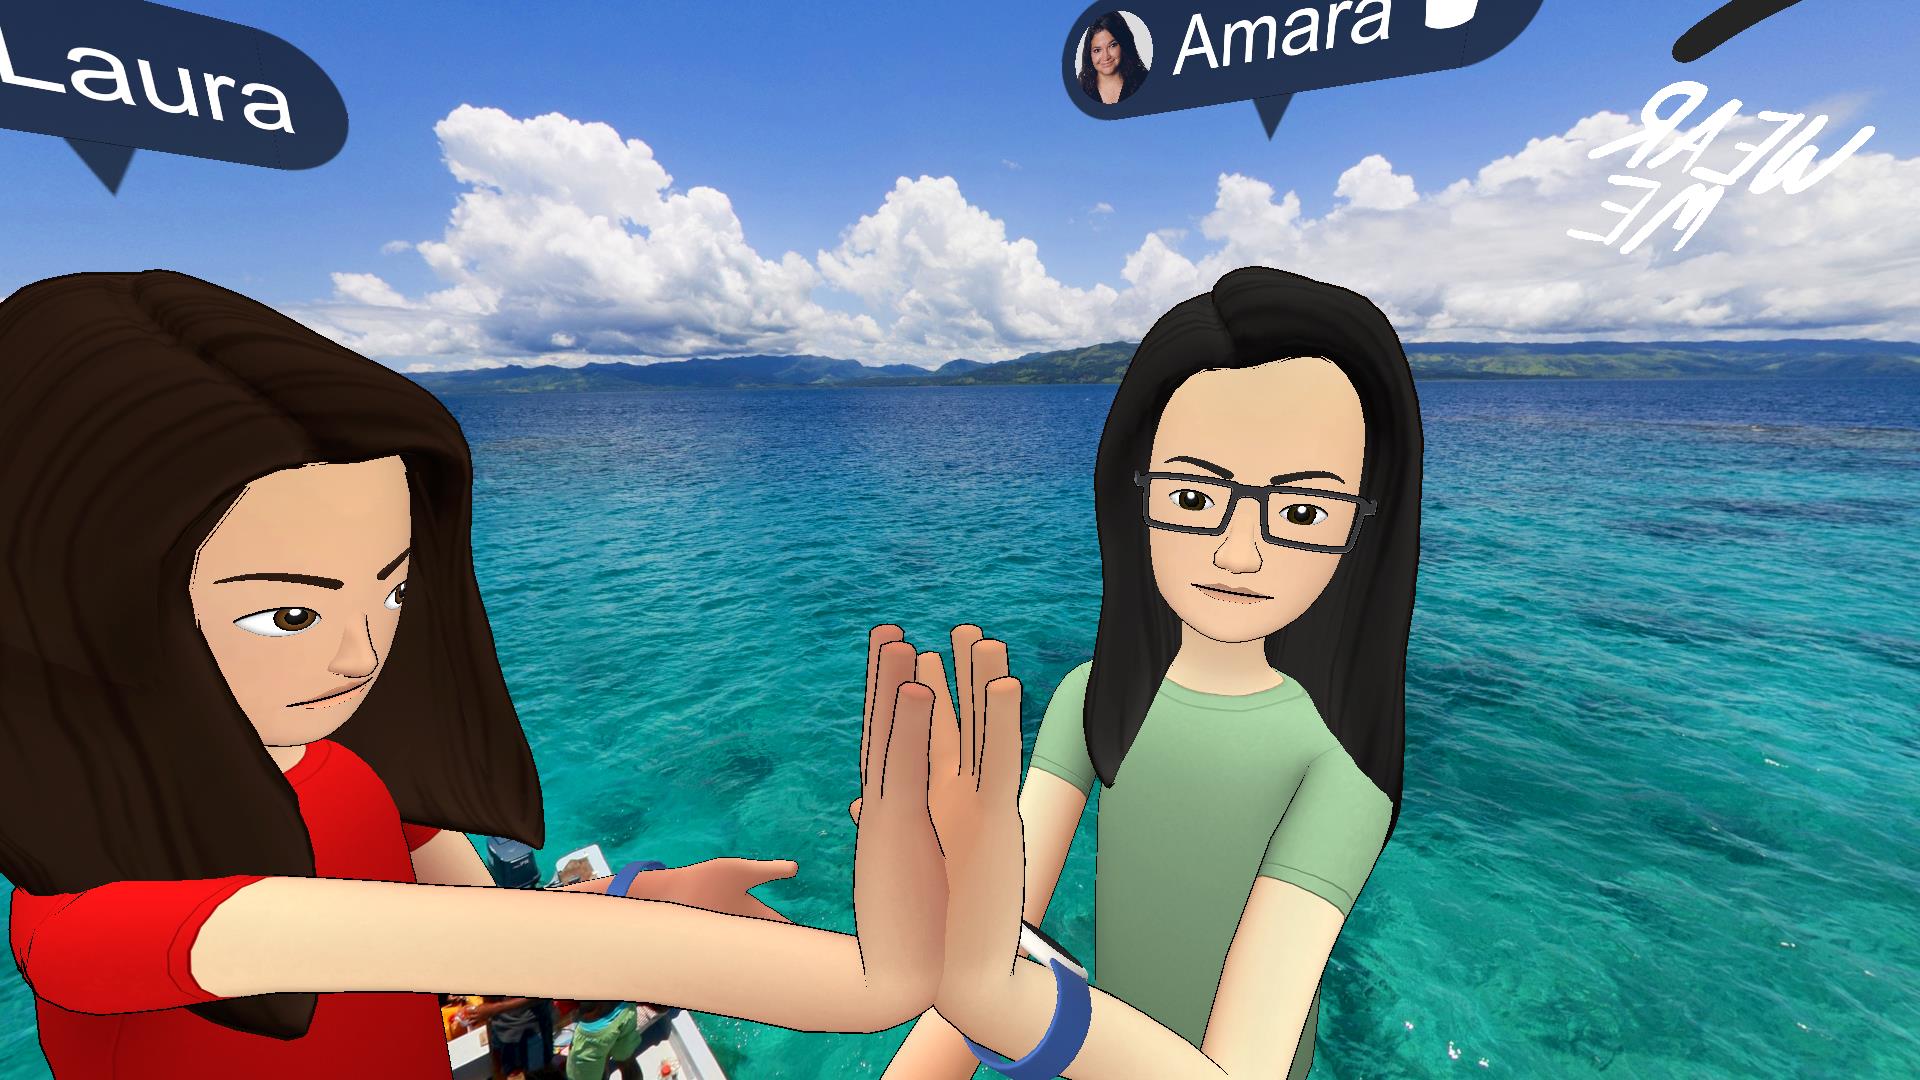 USC Annenberg professors Laura Davis, left, and Amara Aguilar go live for the first time in Facebook Spaces, a social virtual reality app.